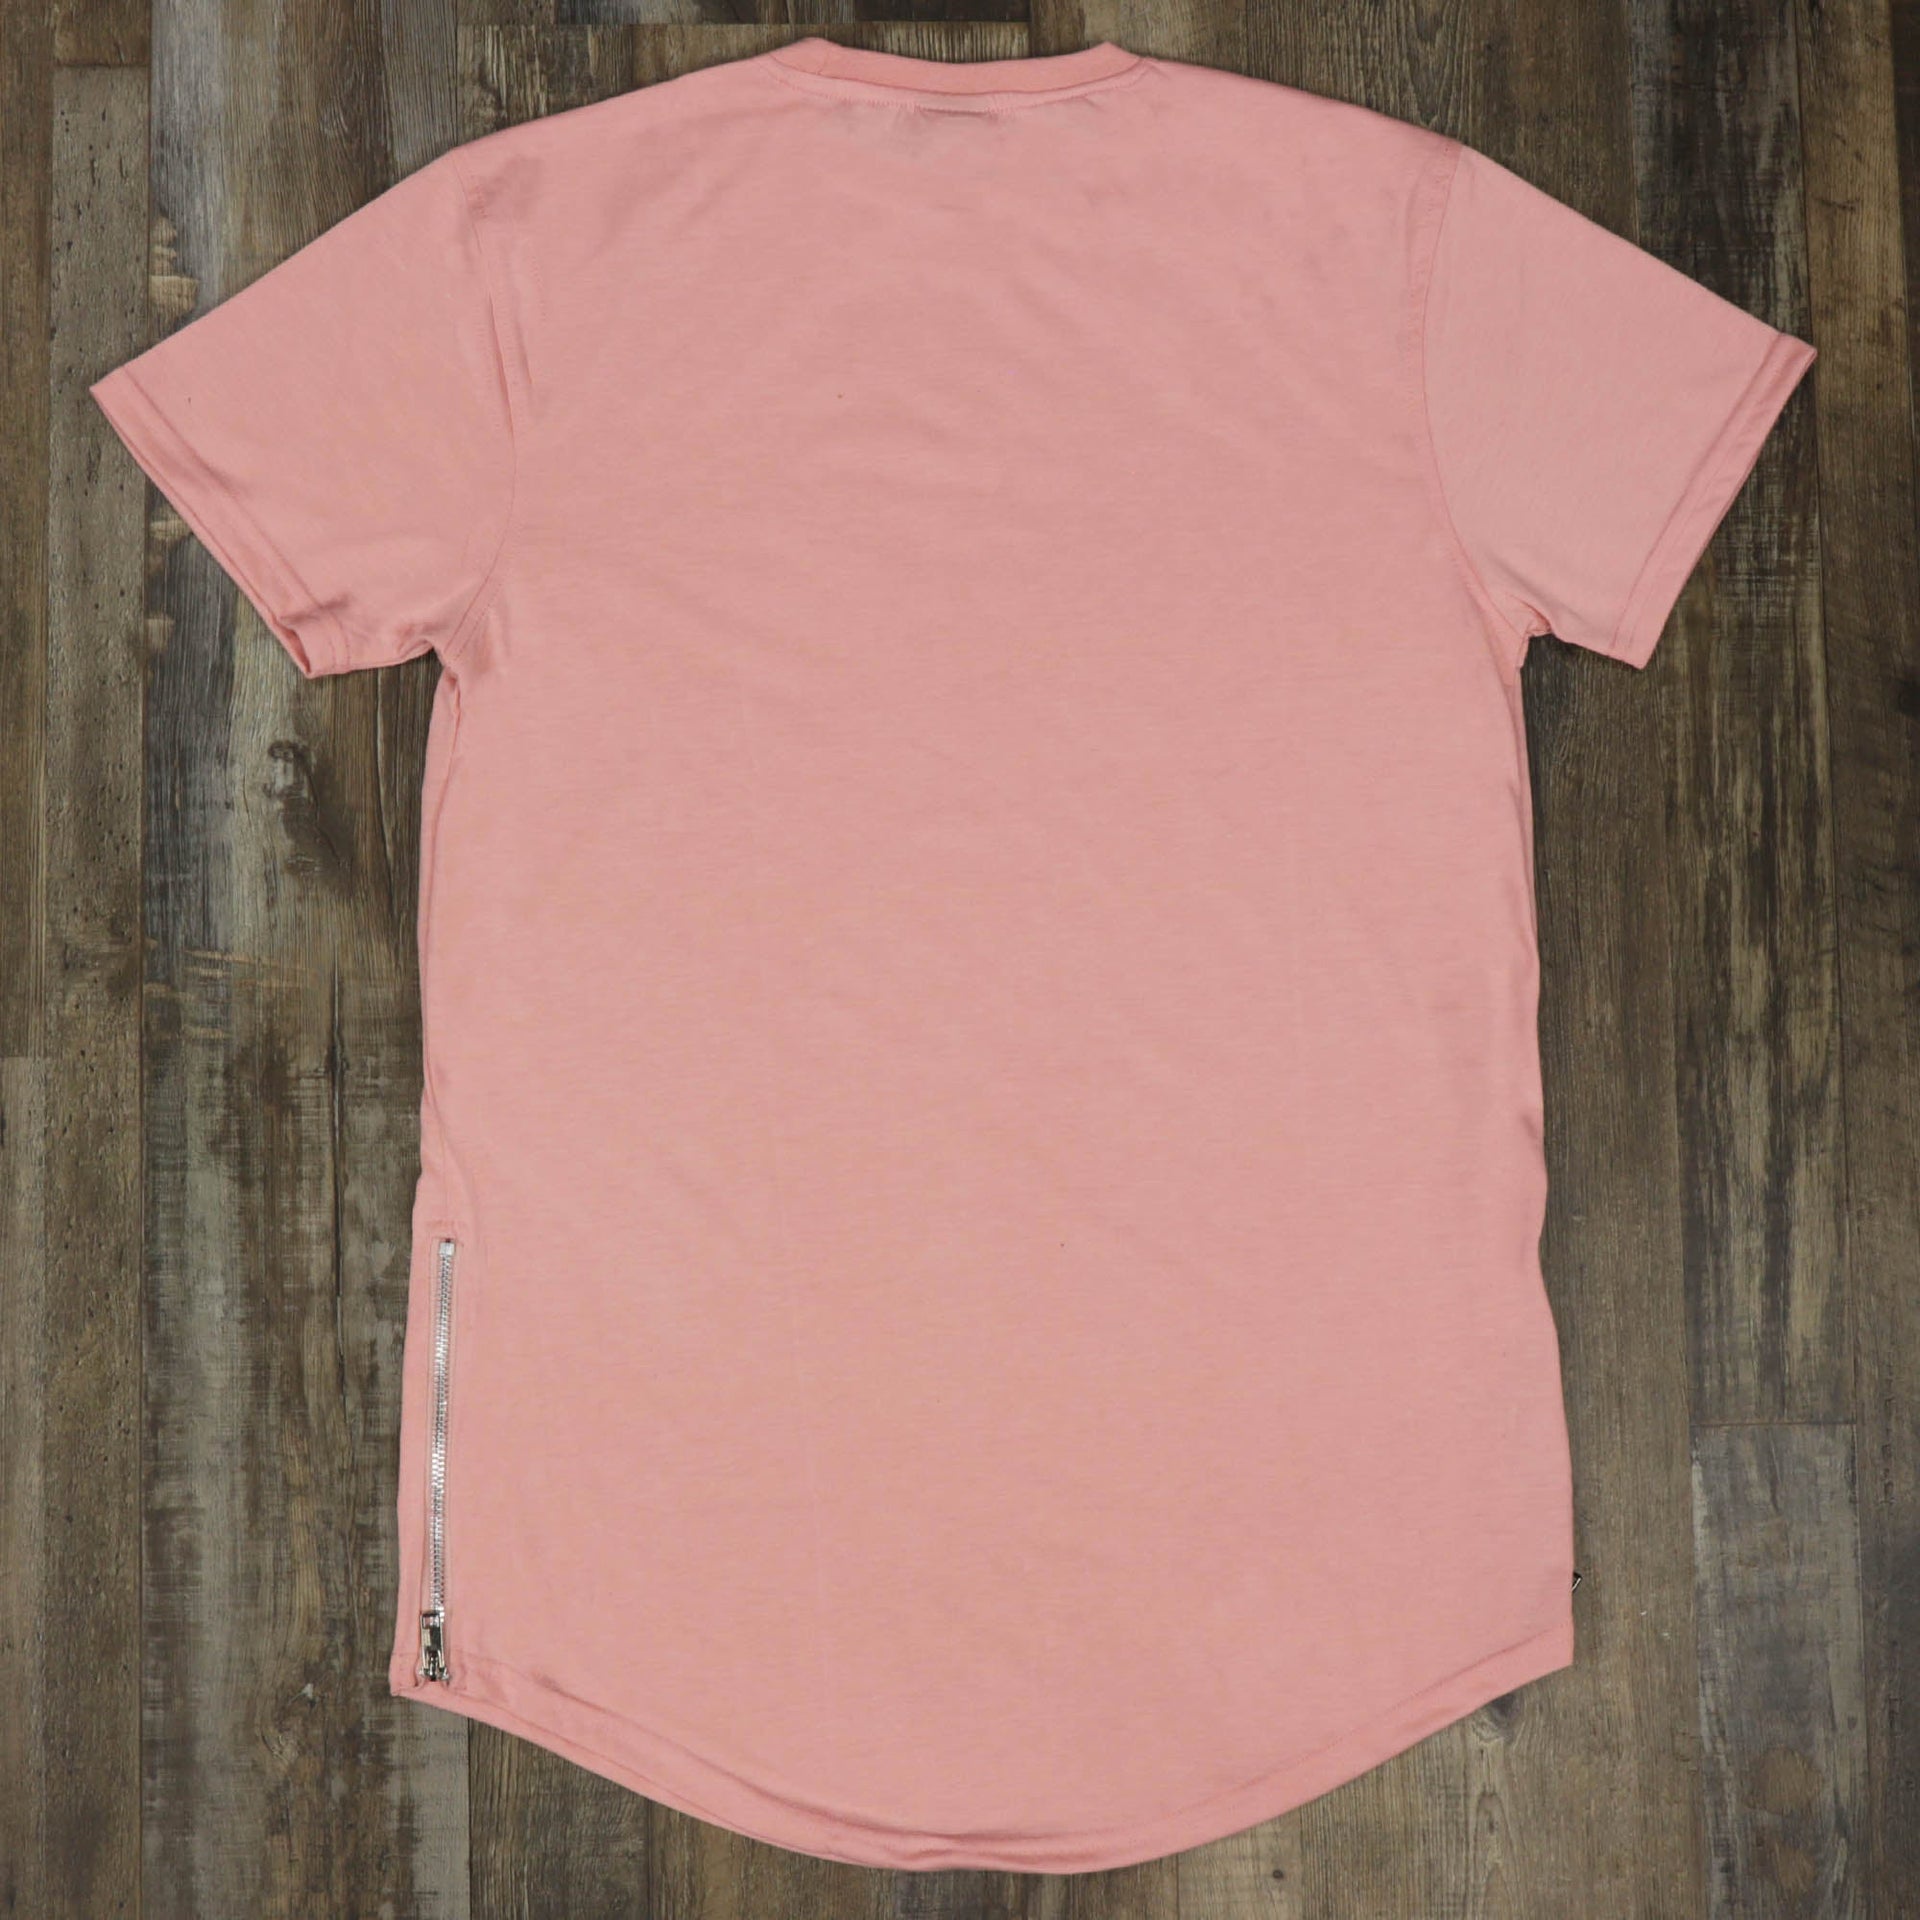 Back of the Scallop Hem Curved Bottom Long Fit Extended Men's Streetwear T-Shirt with Side Zippers | Pastel Pink